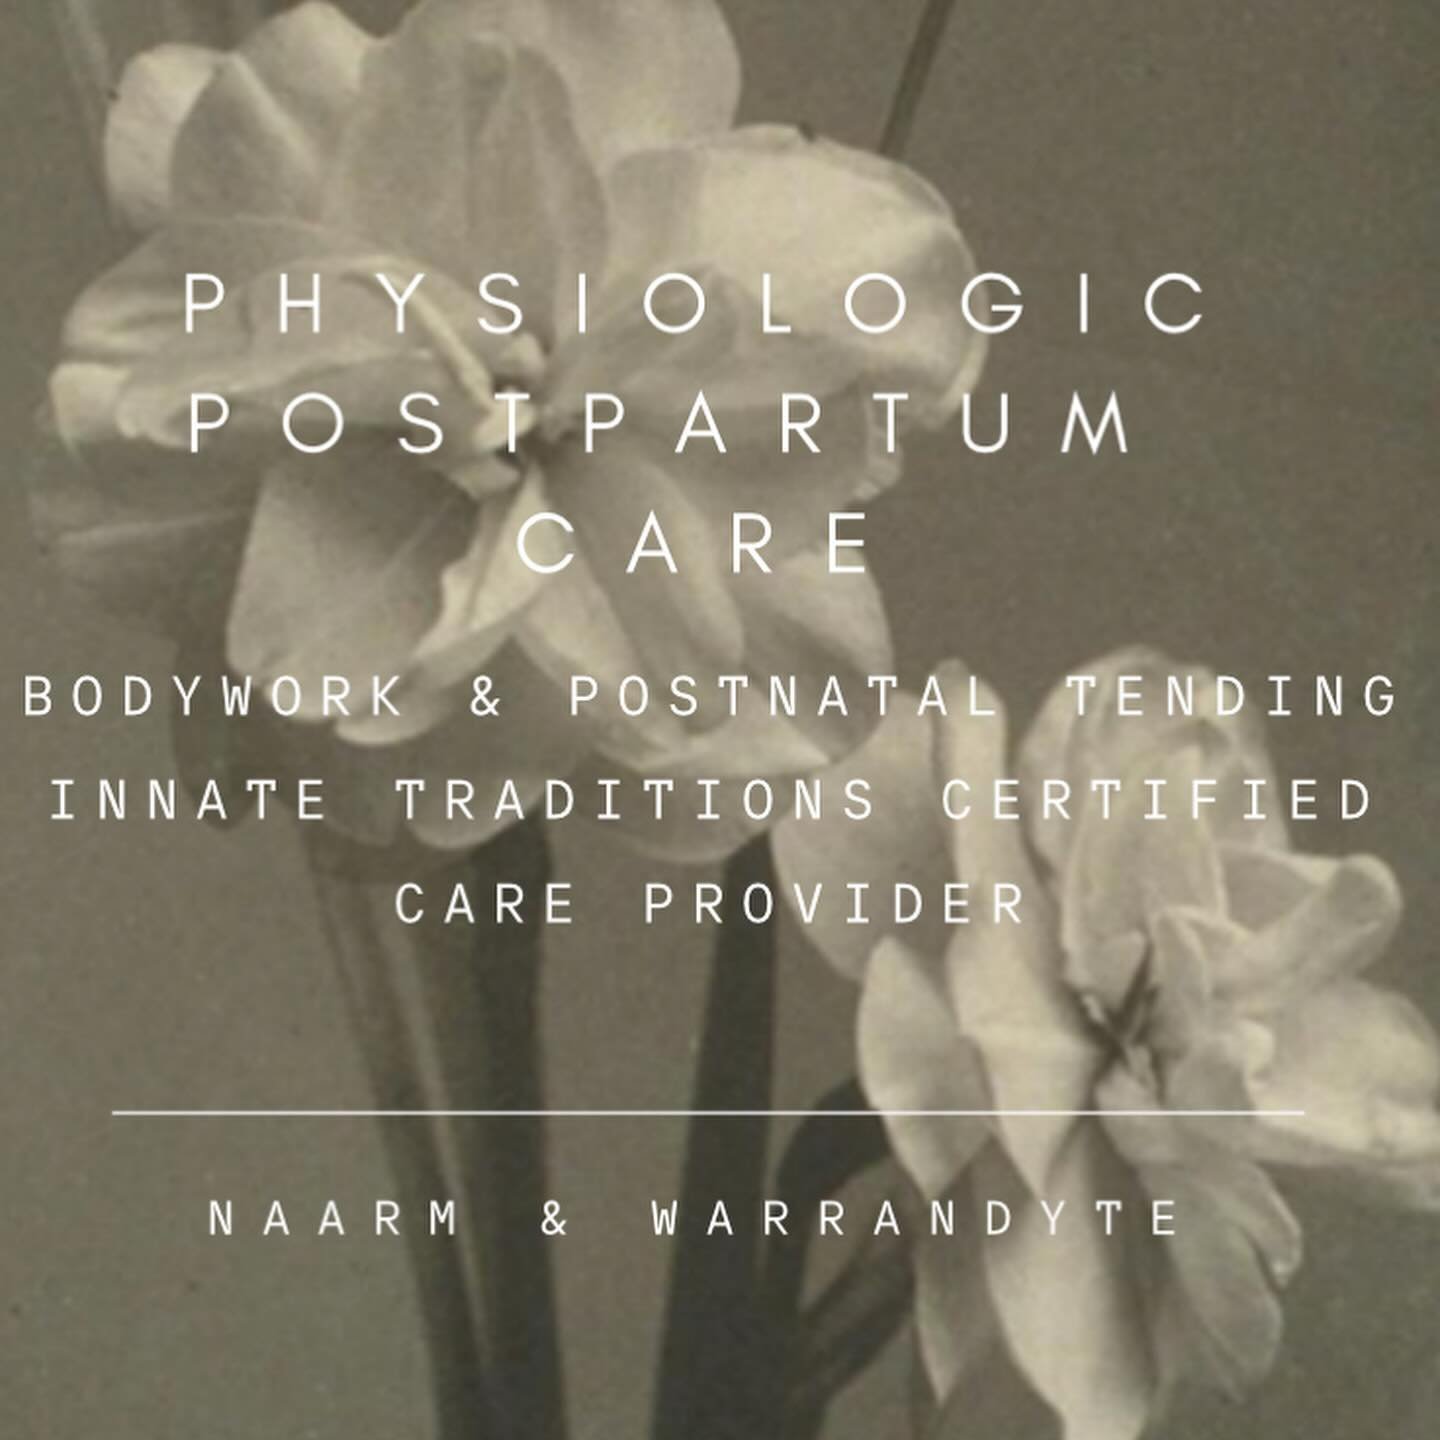 Physiological Postpartum Care is something I&rsquo;m deeply passionate about. The privilege of getting to tend to families &amp; birthing bodies in the often very tender, vulnerable &amp; potent window of  the early postpartum is something I feel so 